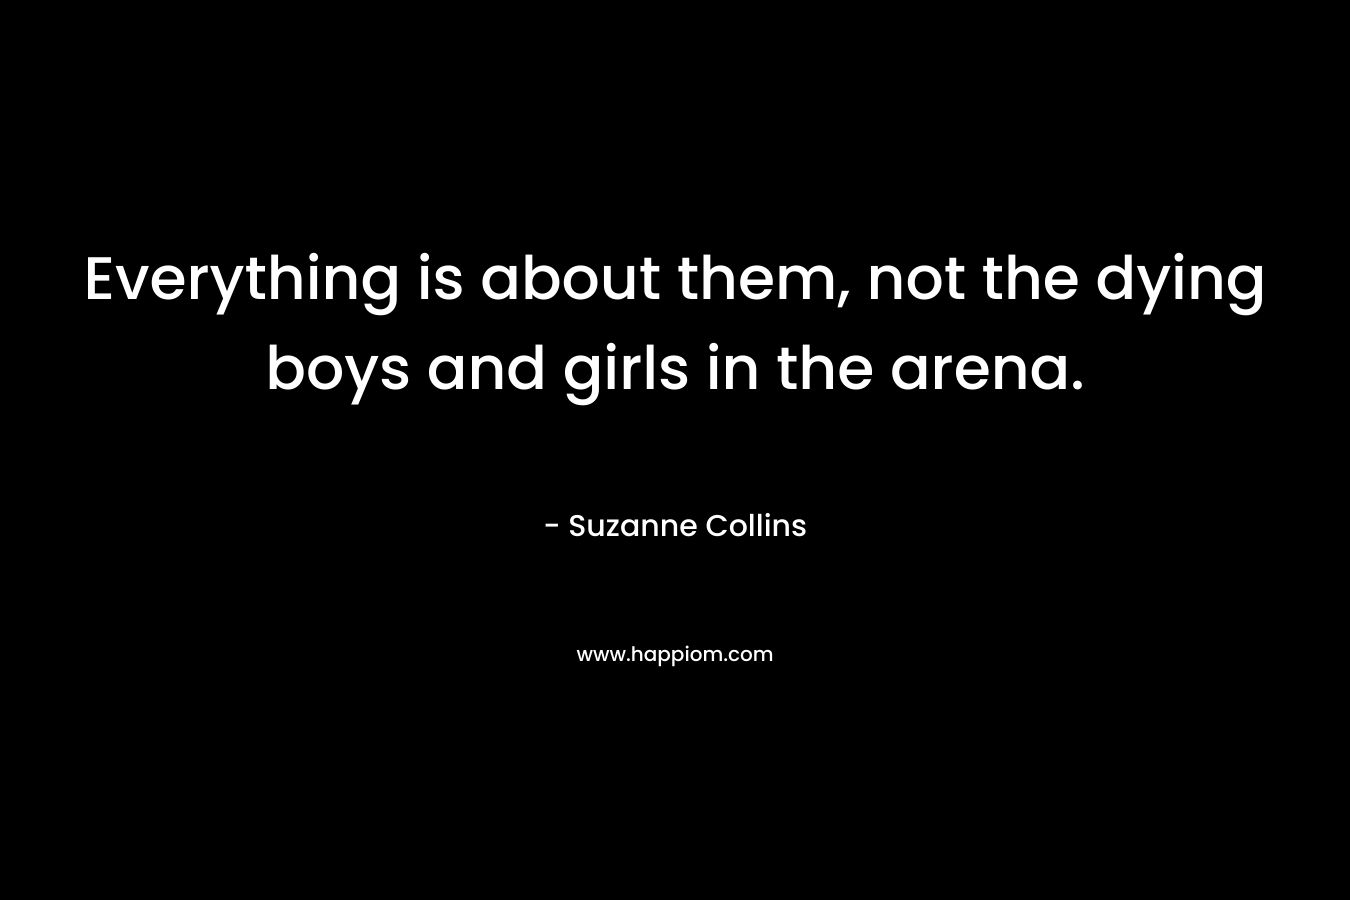 Everything is about them, not the dying boys and girls in the arena. – Suzanne Collins